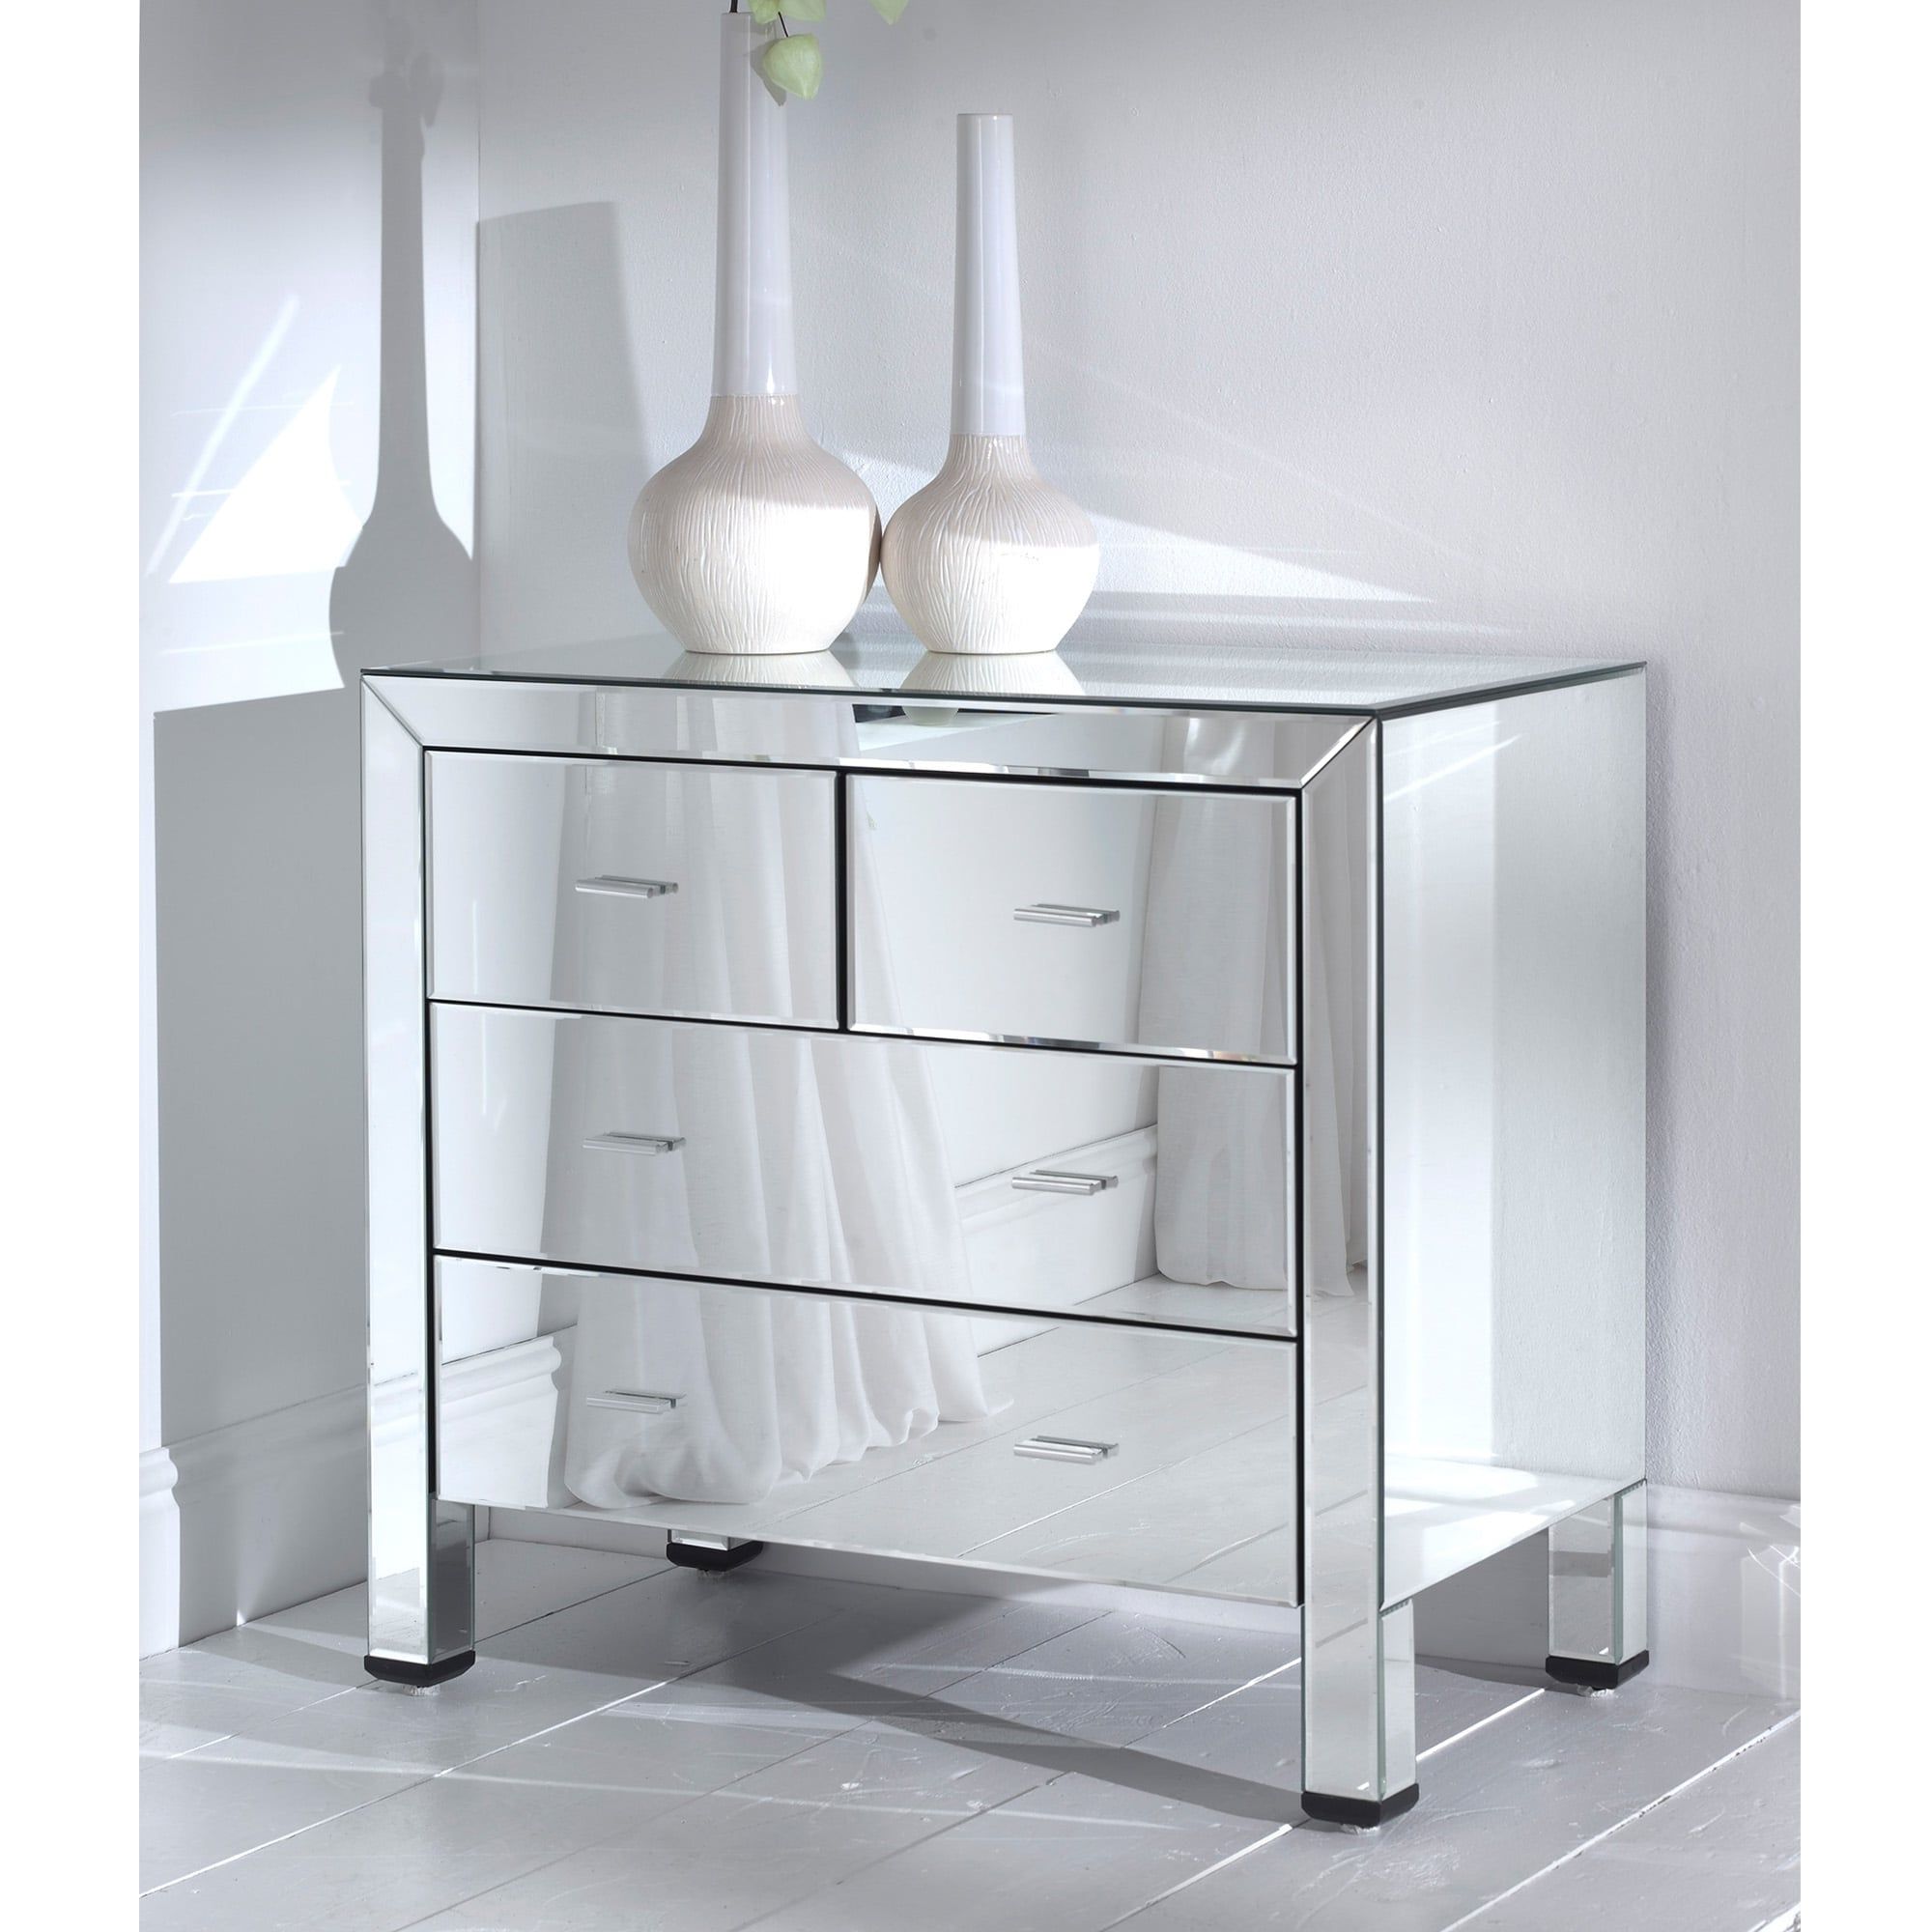 Romano Mirrored Chest 4 Drawer | Bedroom Chest Of Drawers | Mirrored | With Regard To Romano Mirrored Wardrobes (View 8 of 20)